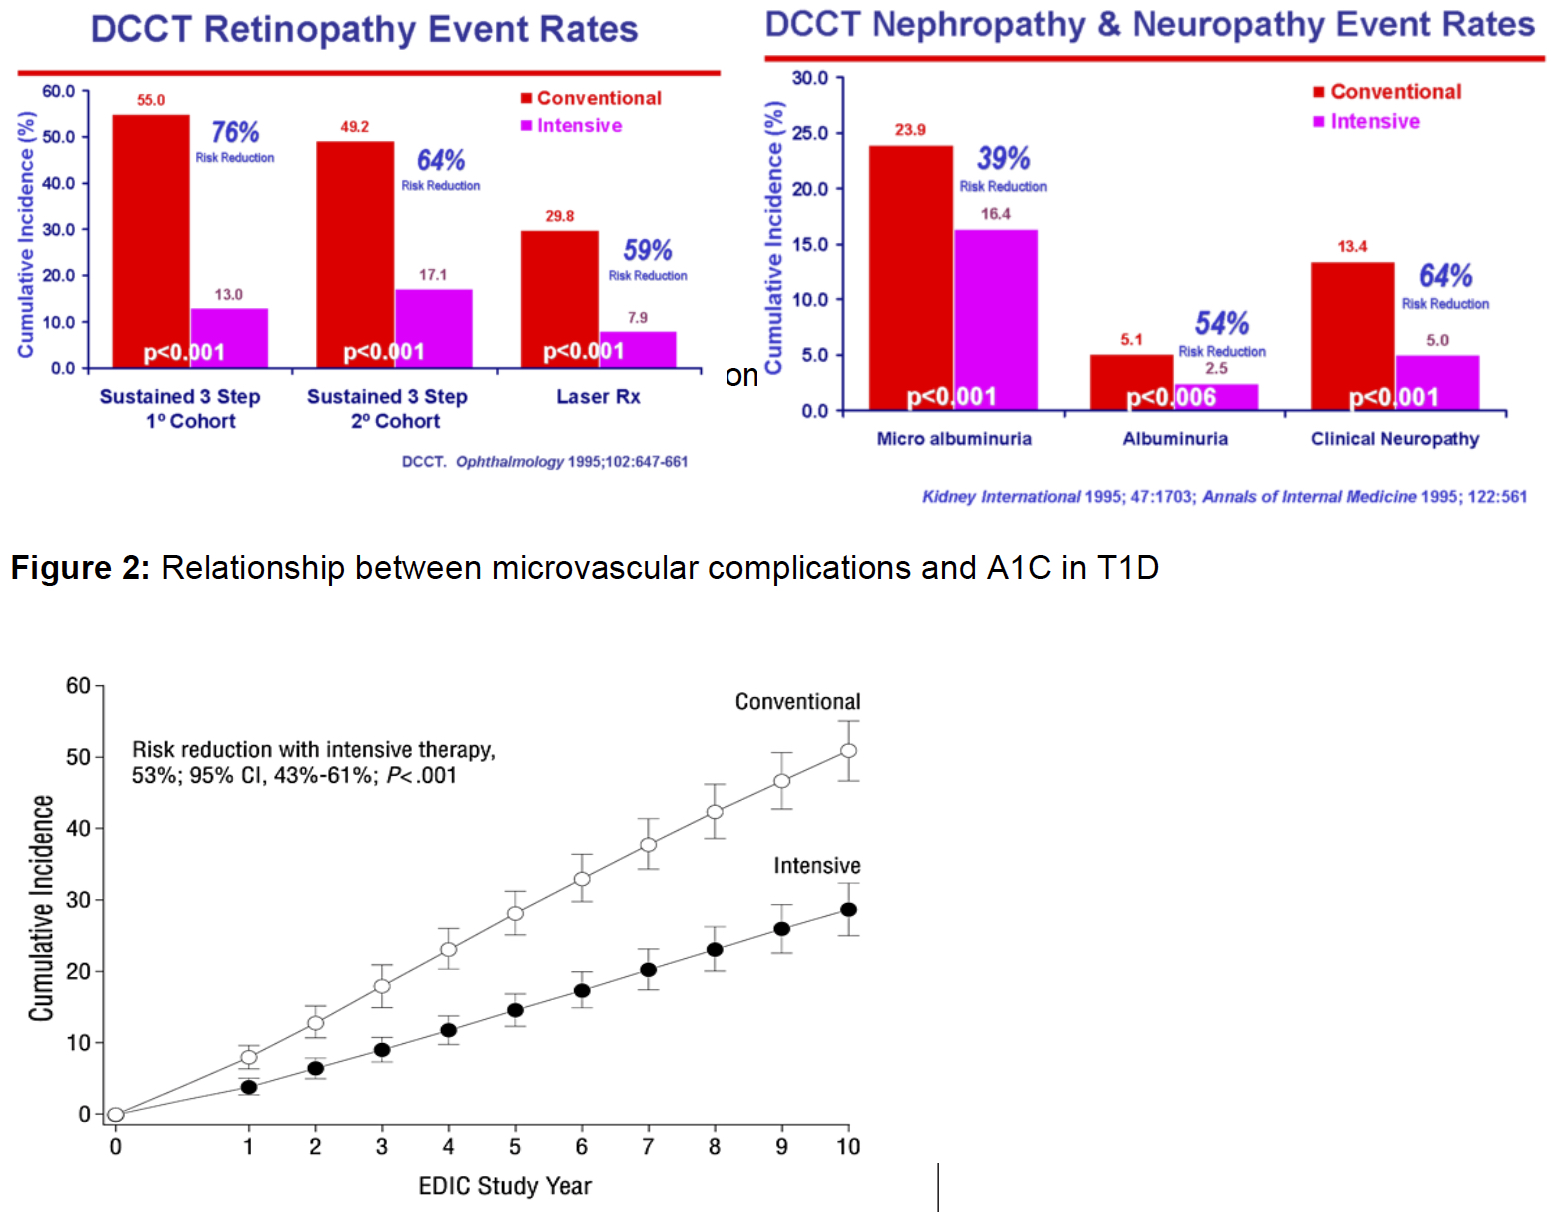 Figure 2: Relationship between microvascular complications and A1C in T1D